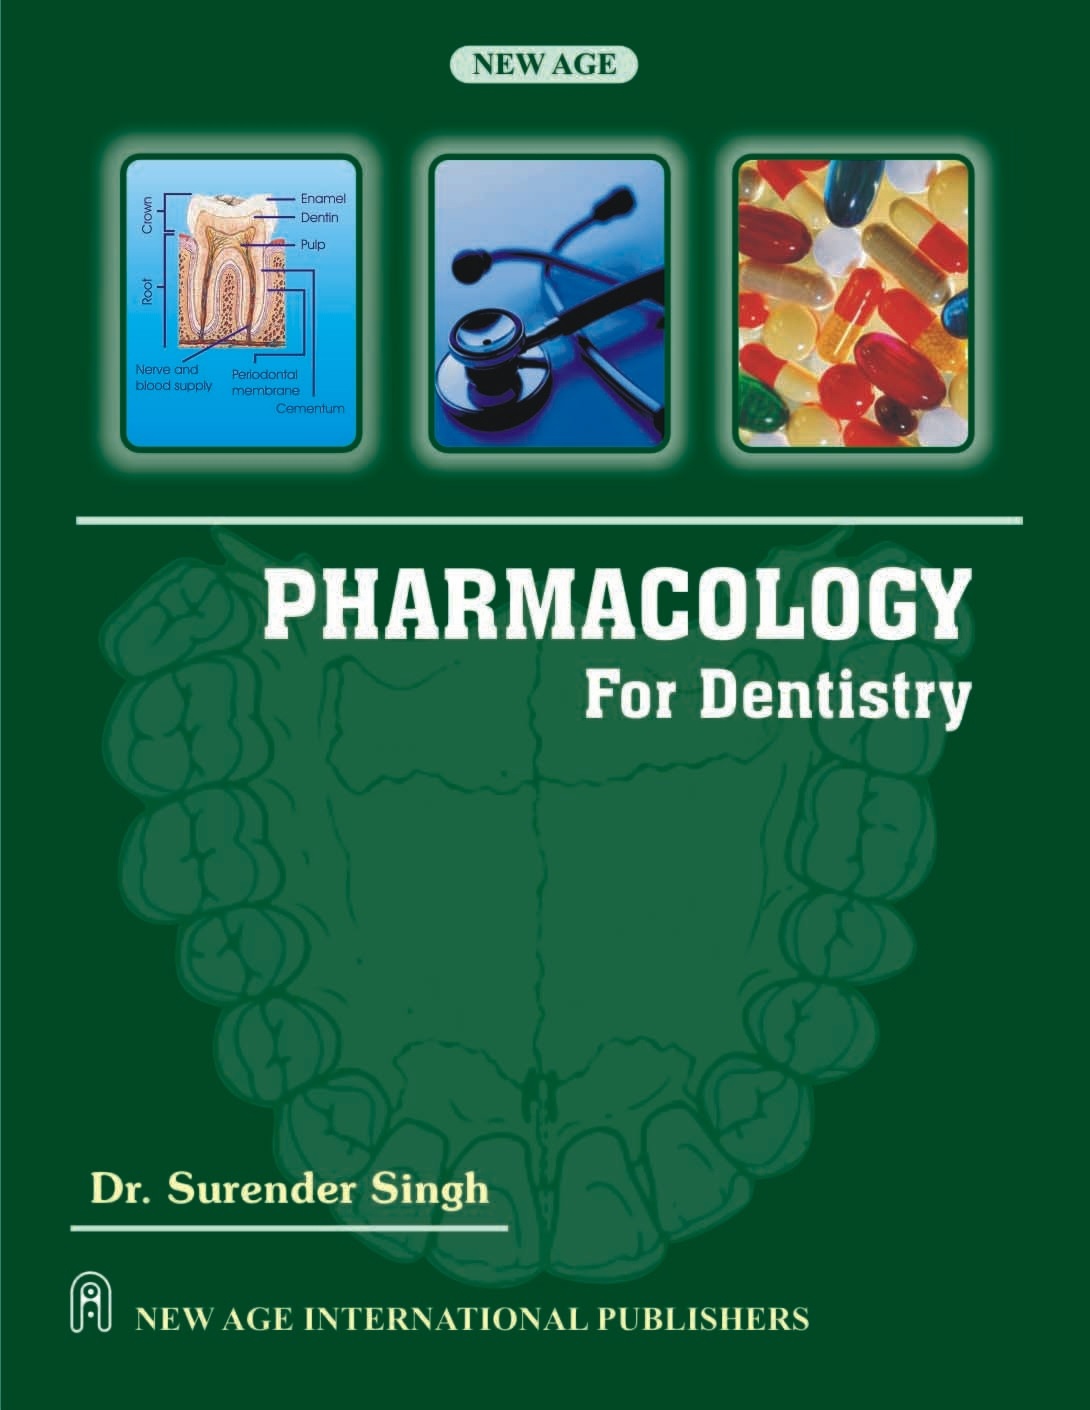 Pharmacology for Dentistry pdf book free download